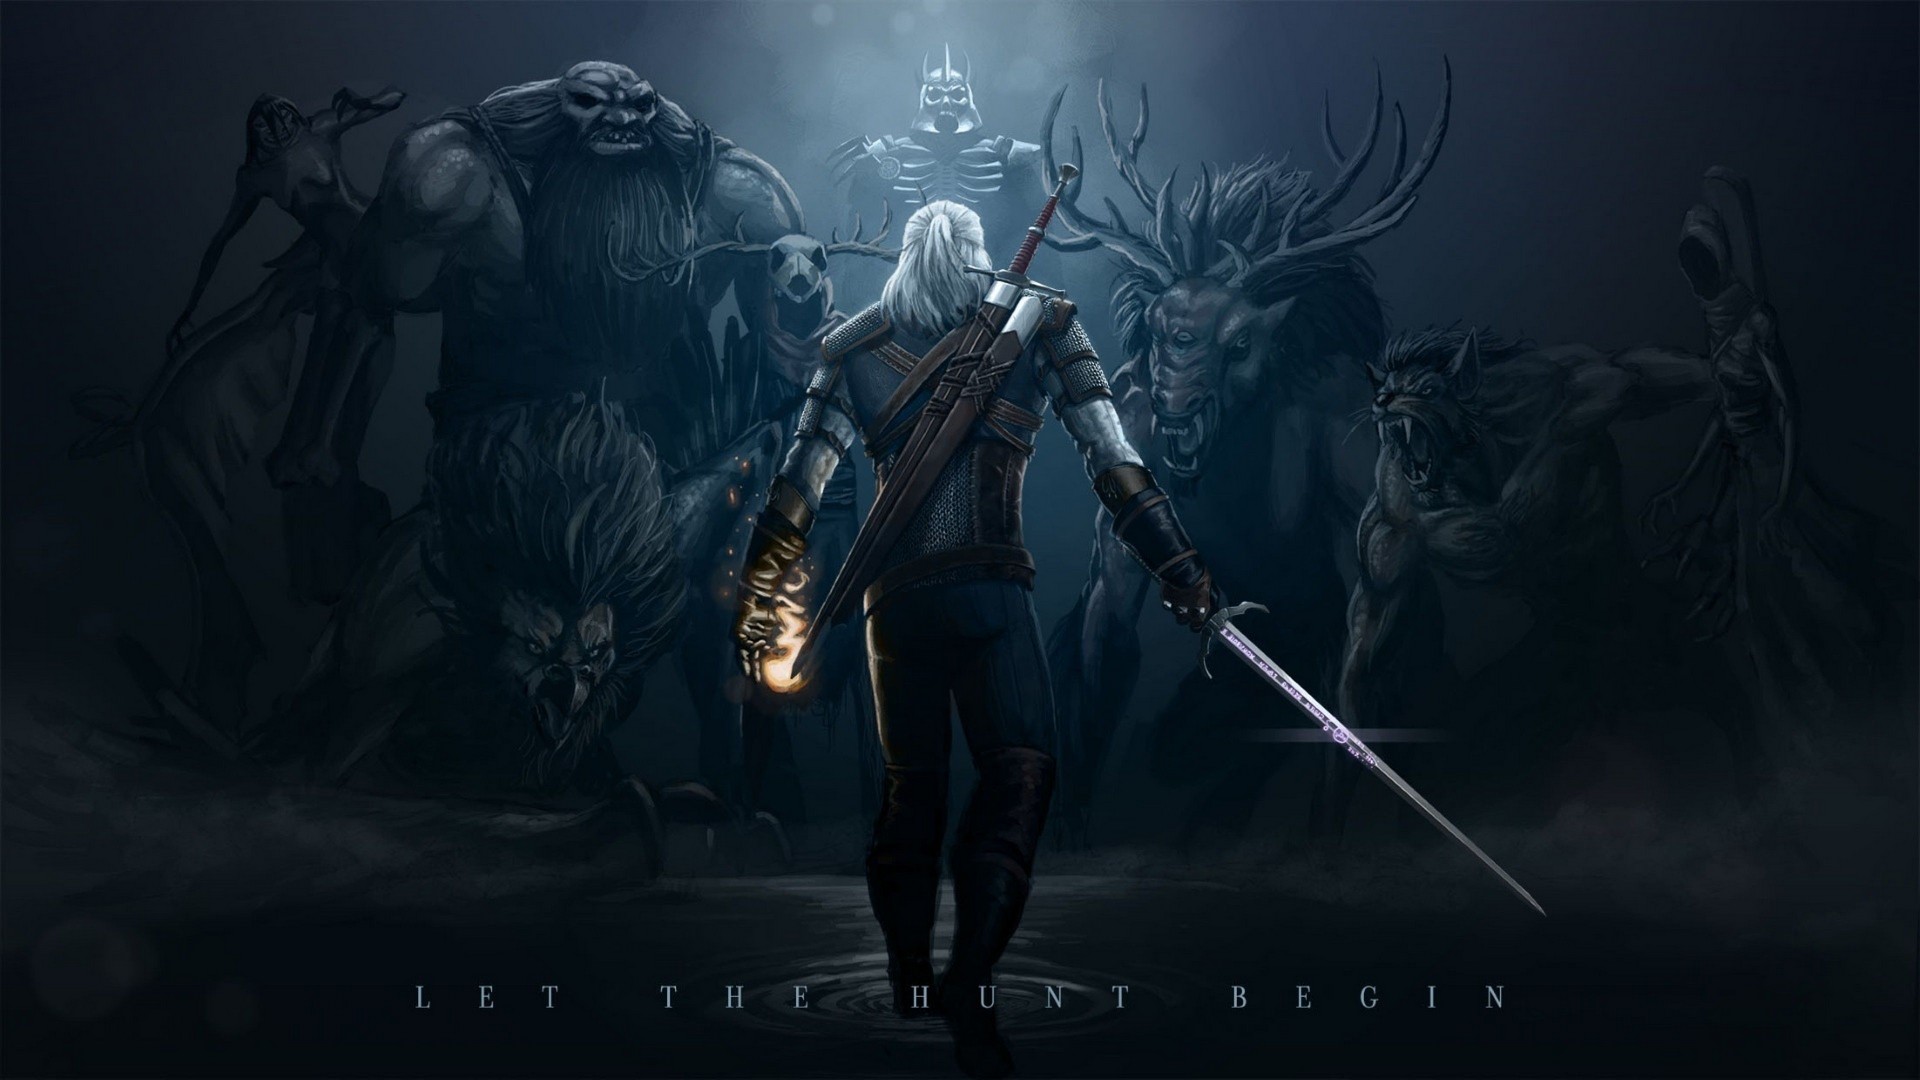 Movie Wallpaper The Witcher with high-resolution 1920x1080 pixel. You can use this poster wallpaper for your Desktop Computers, Mac Screensavers, Windows Backgrounds, iPhone Wallpapers, Tablet or Android Lock screen and another Mobile device